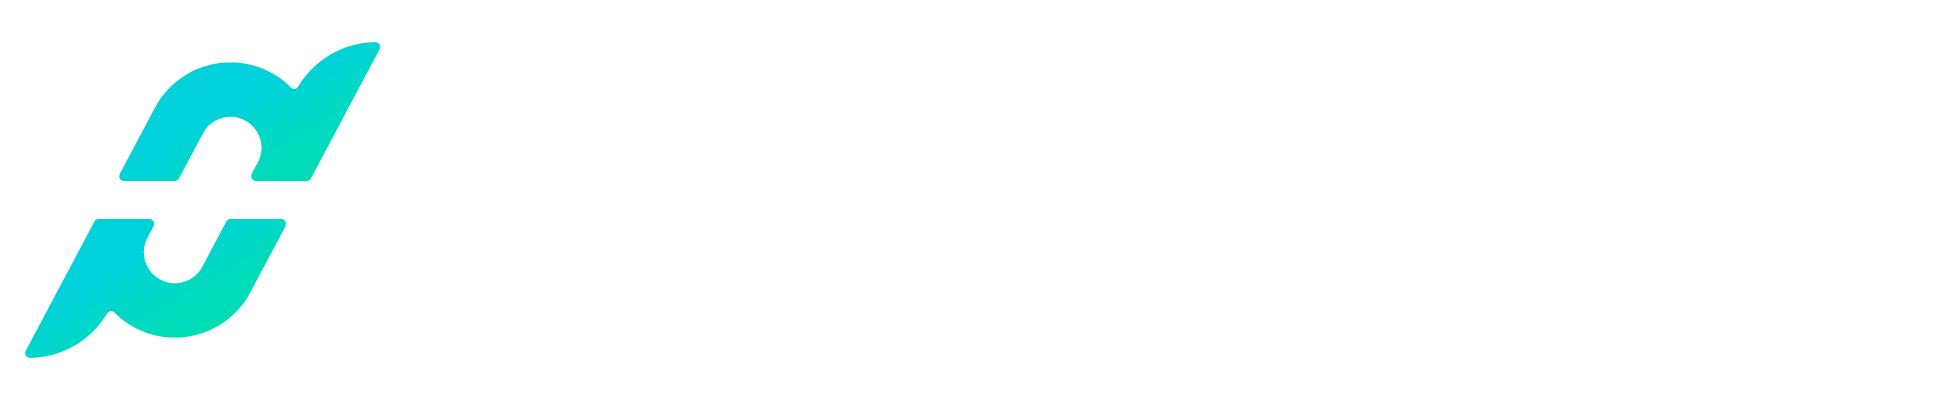 Your Perfect Dose logo